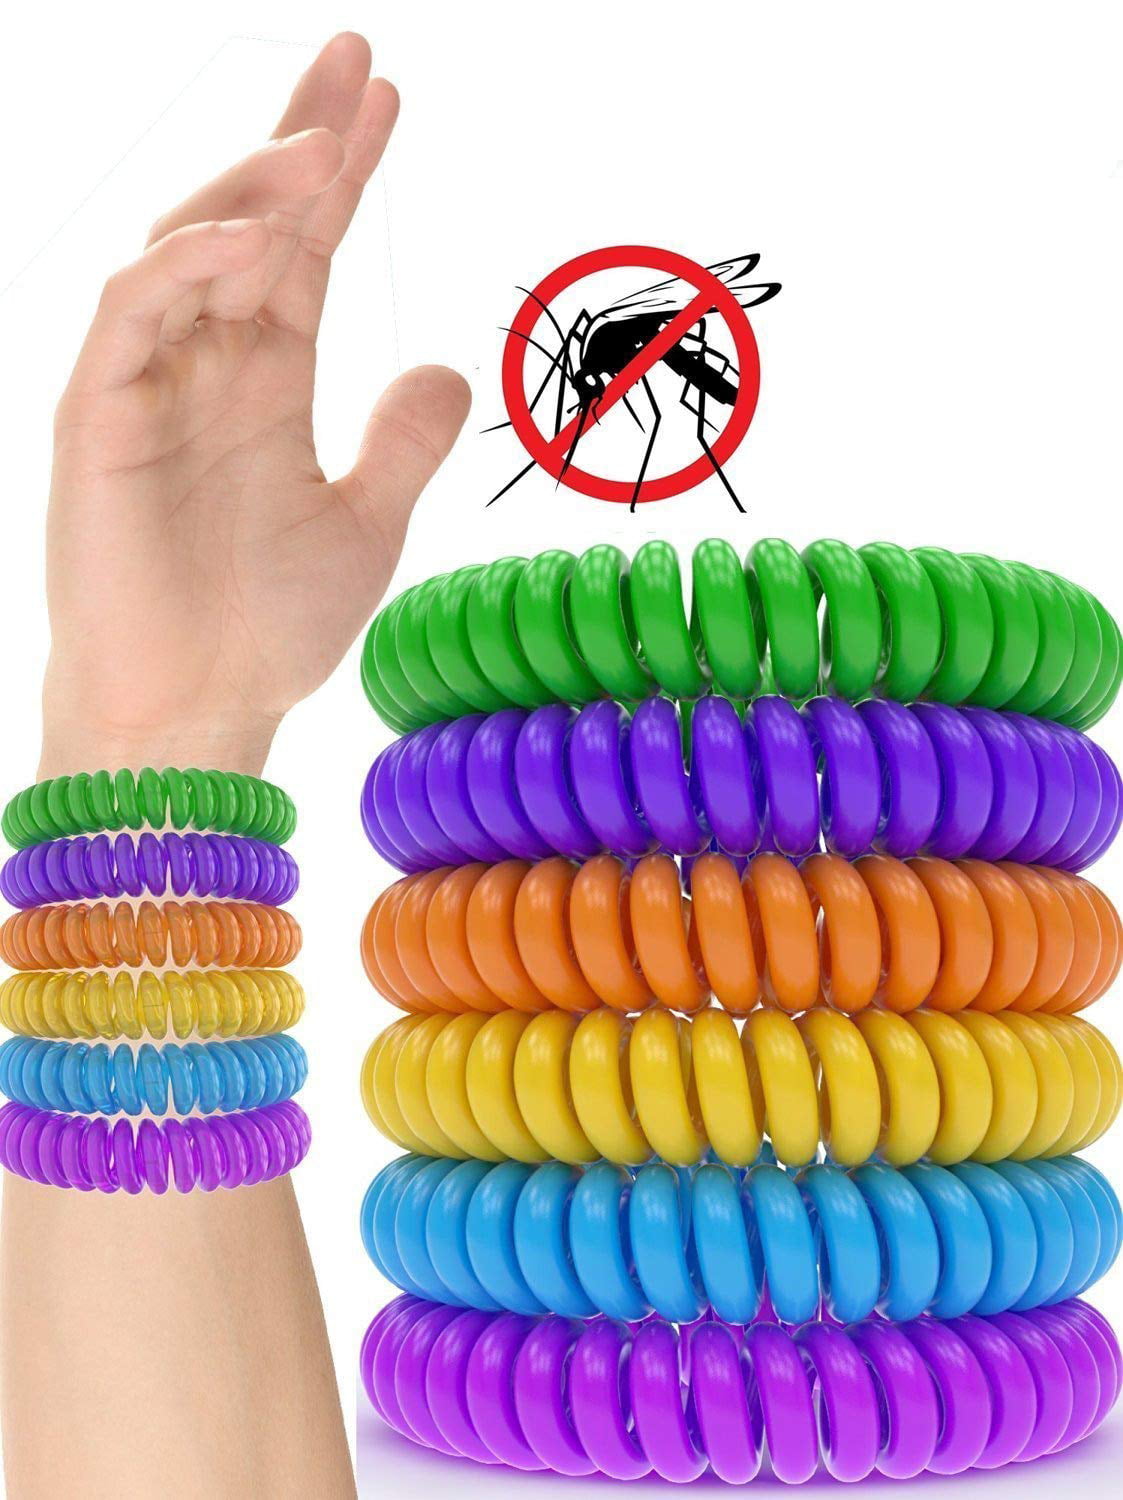 Natural Bug Defense Mosquito Repellent Bands Review - YouTube